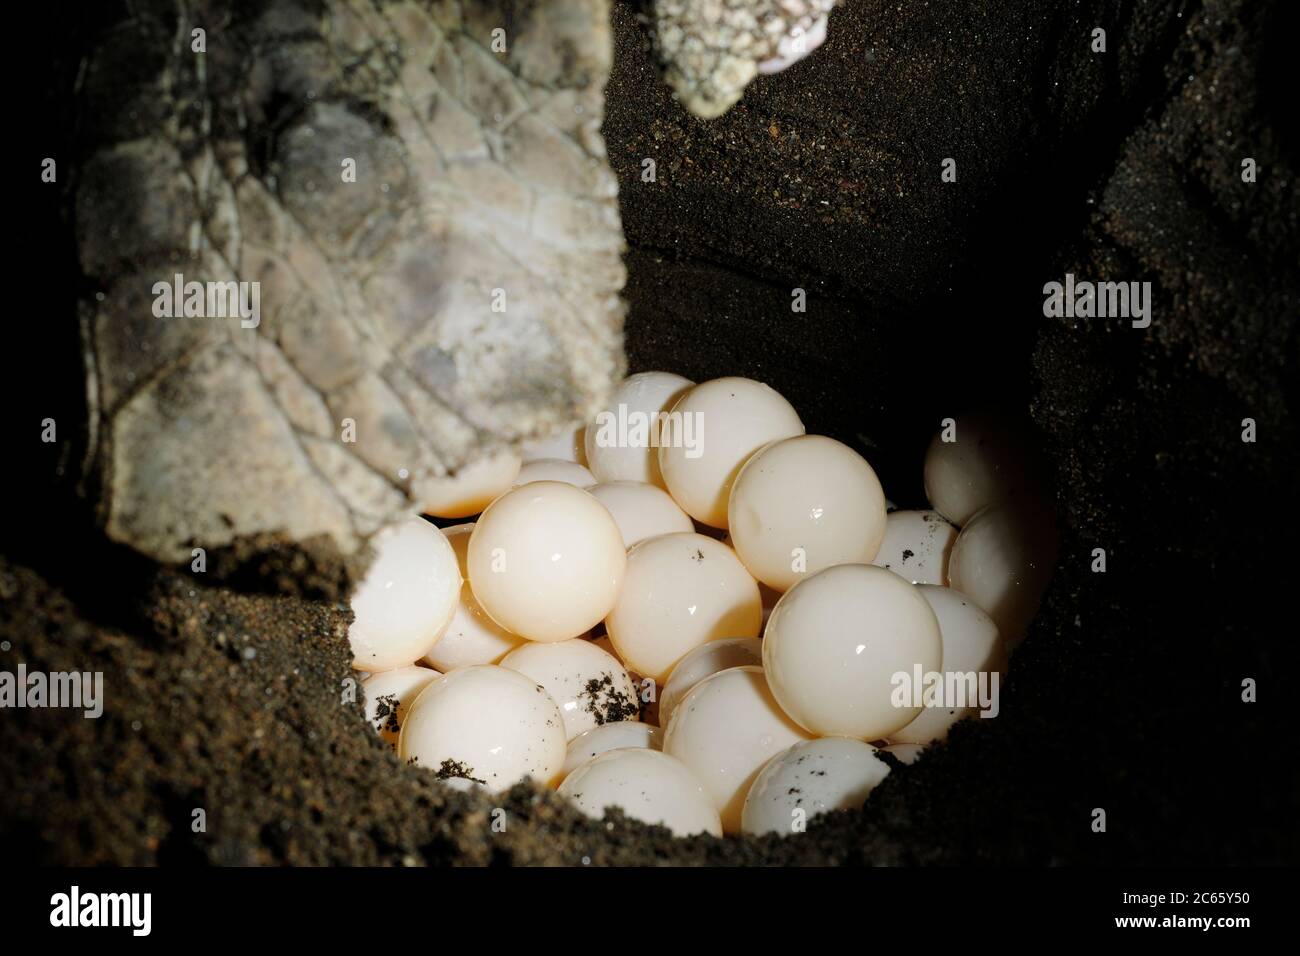 After digging a hole of 30 to 50 centimetre depth with its rear flippers the olive ridley sea turtle (Lepidochelys olivacea) lays approx. 100 eggs. Stock Photo